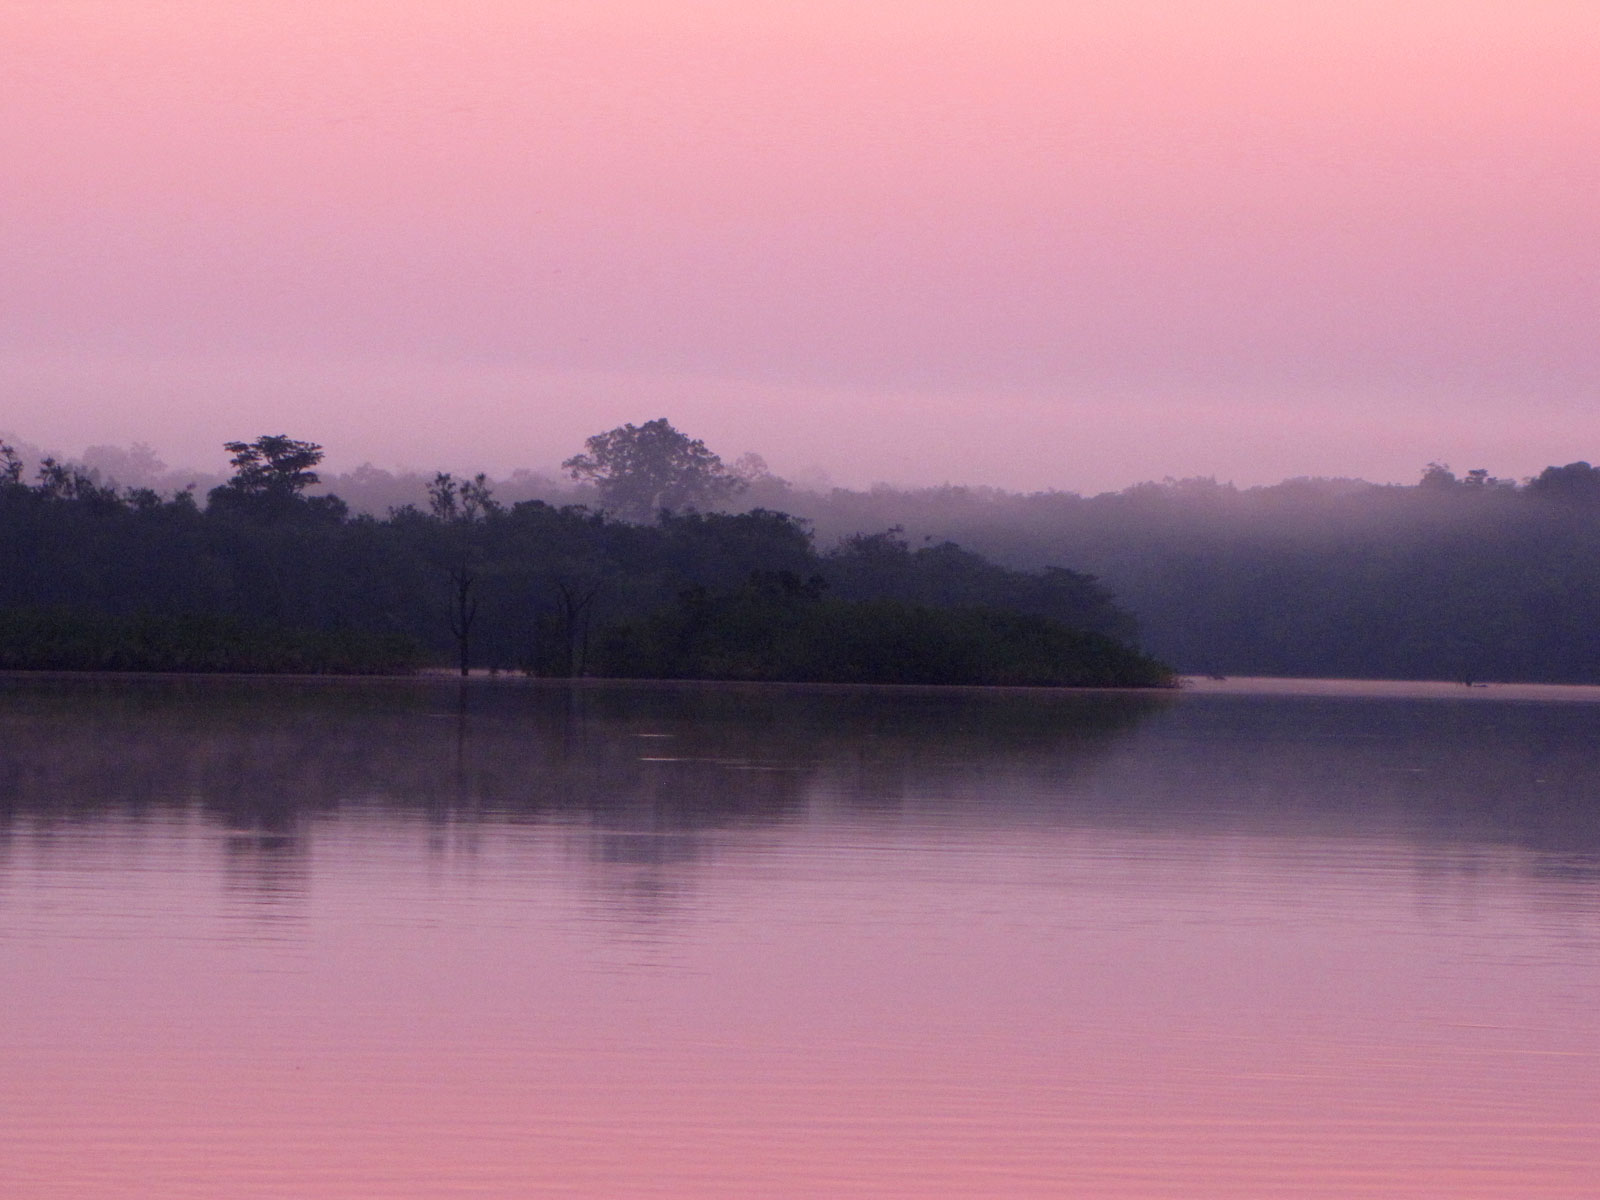 the silhouette of trees stand over the water at dusk